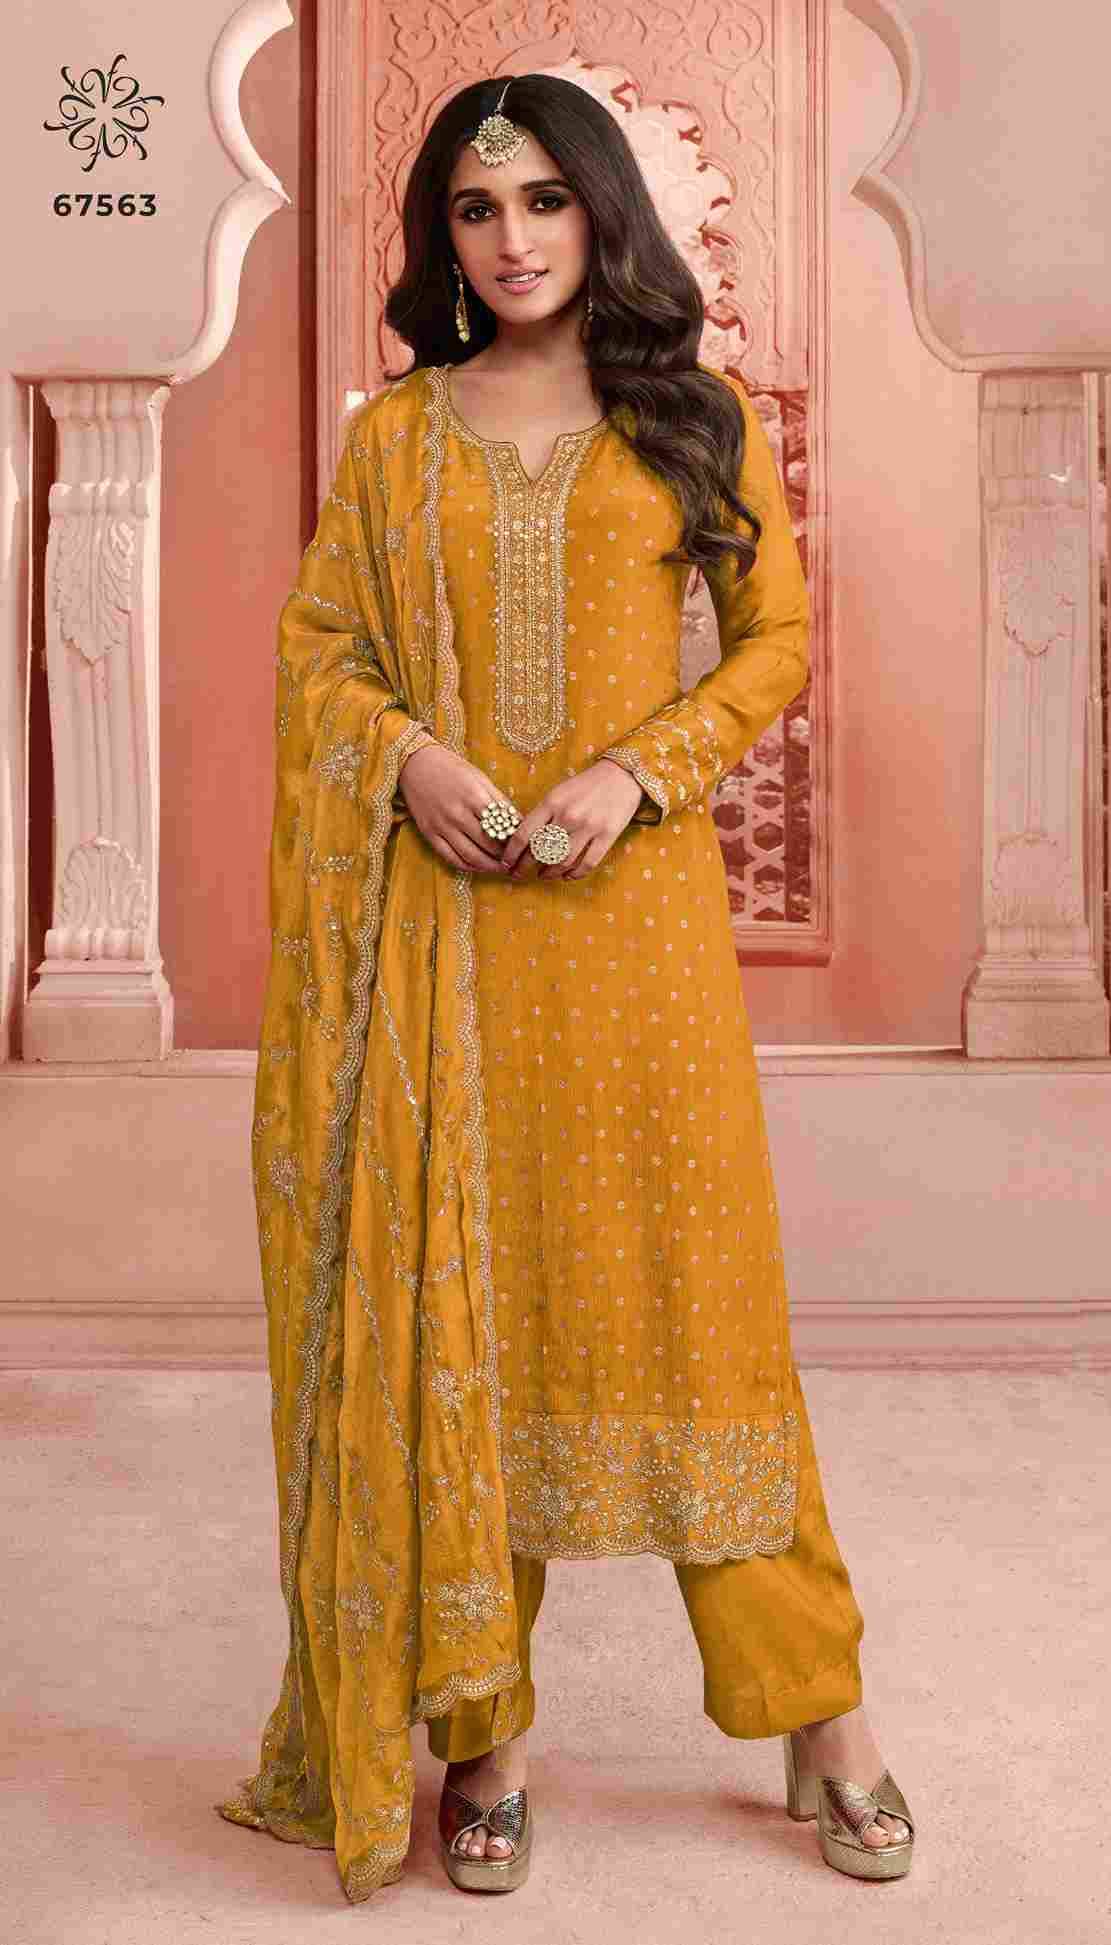 Swarnaa Colour Plus By Vinay Fashion 67561 To 67566 Series Designer Festive Suits Beautiful Fancy Colorful Stylish Party Wear & Occasional Wear Dola Jacquard Dresses At Wholesale Price